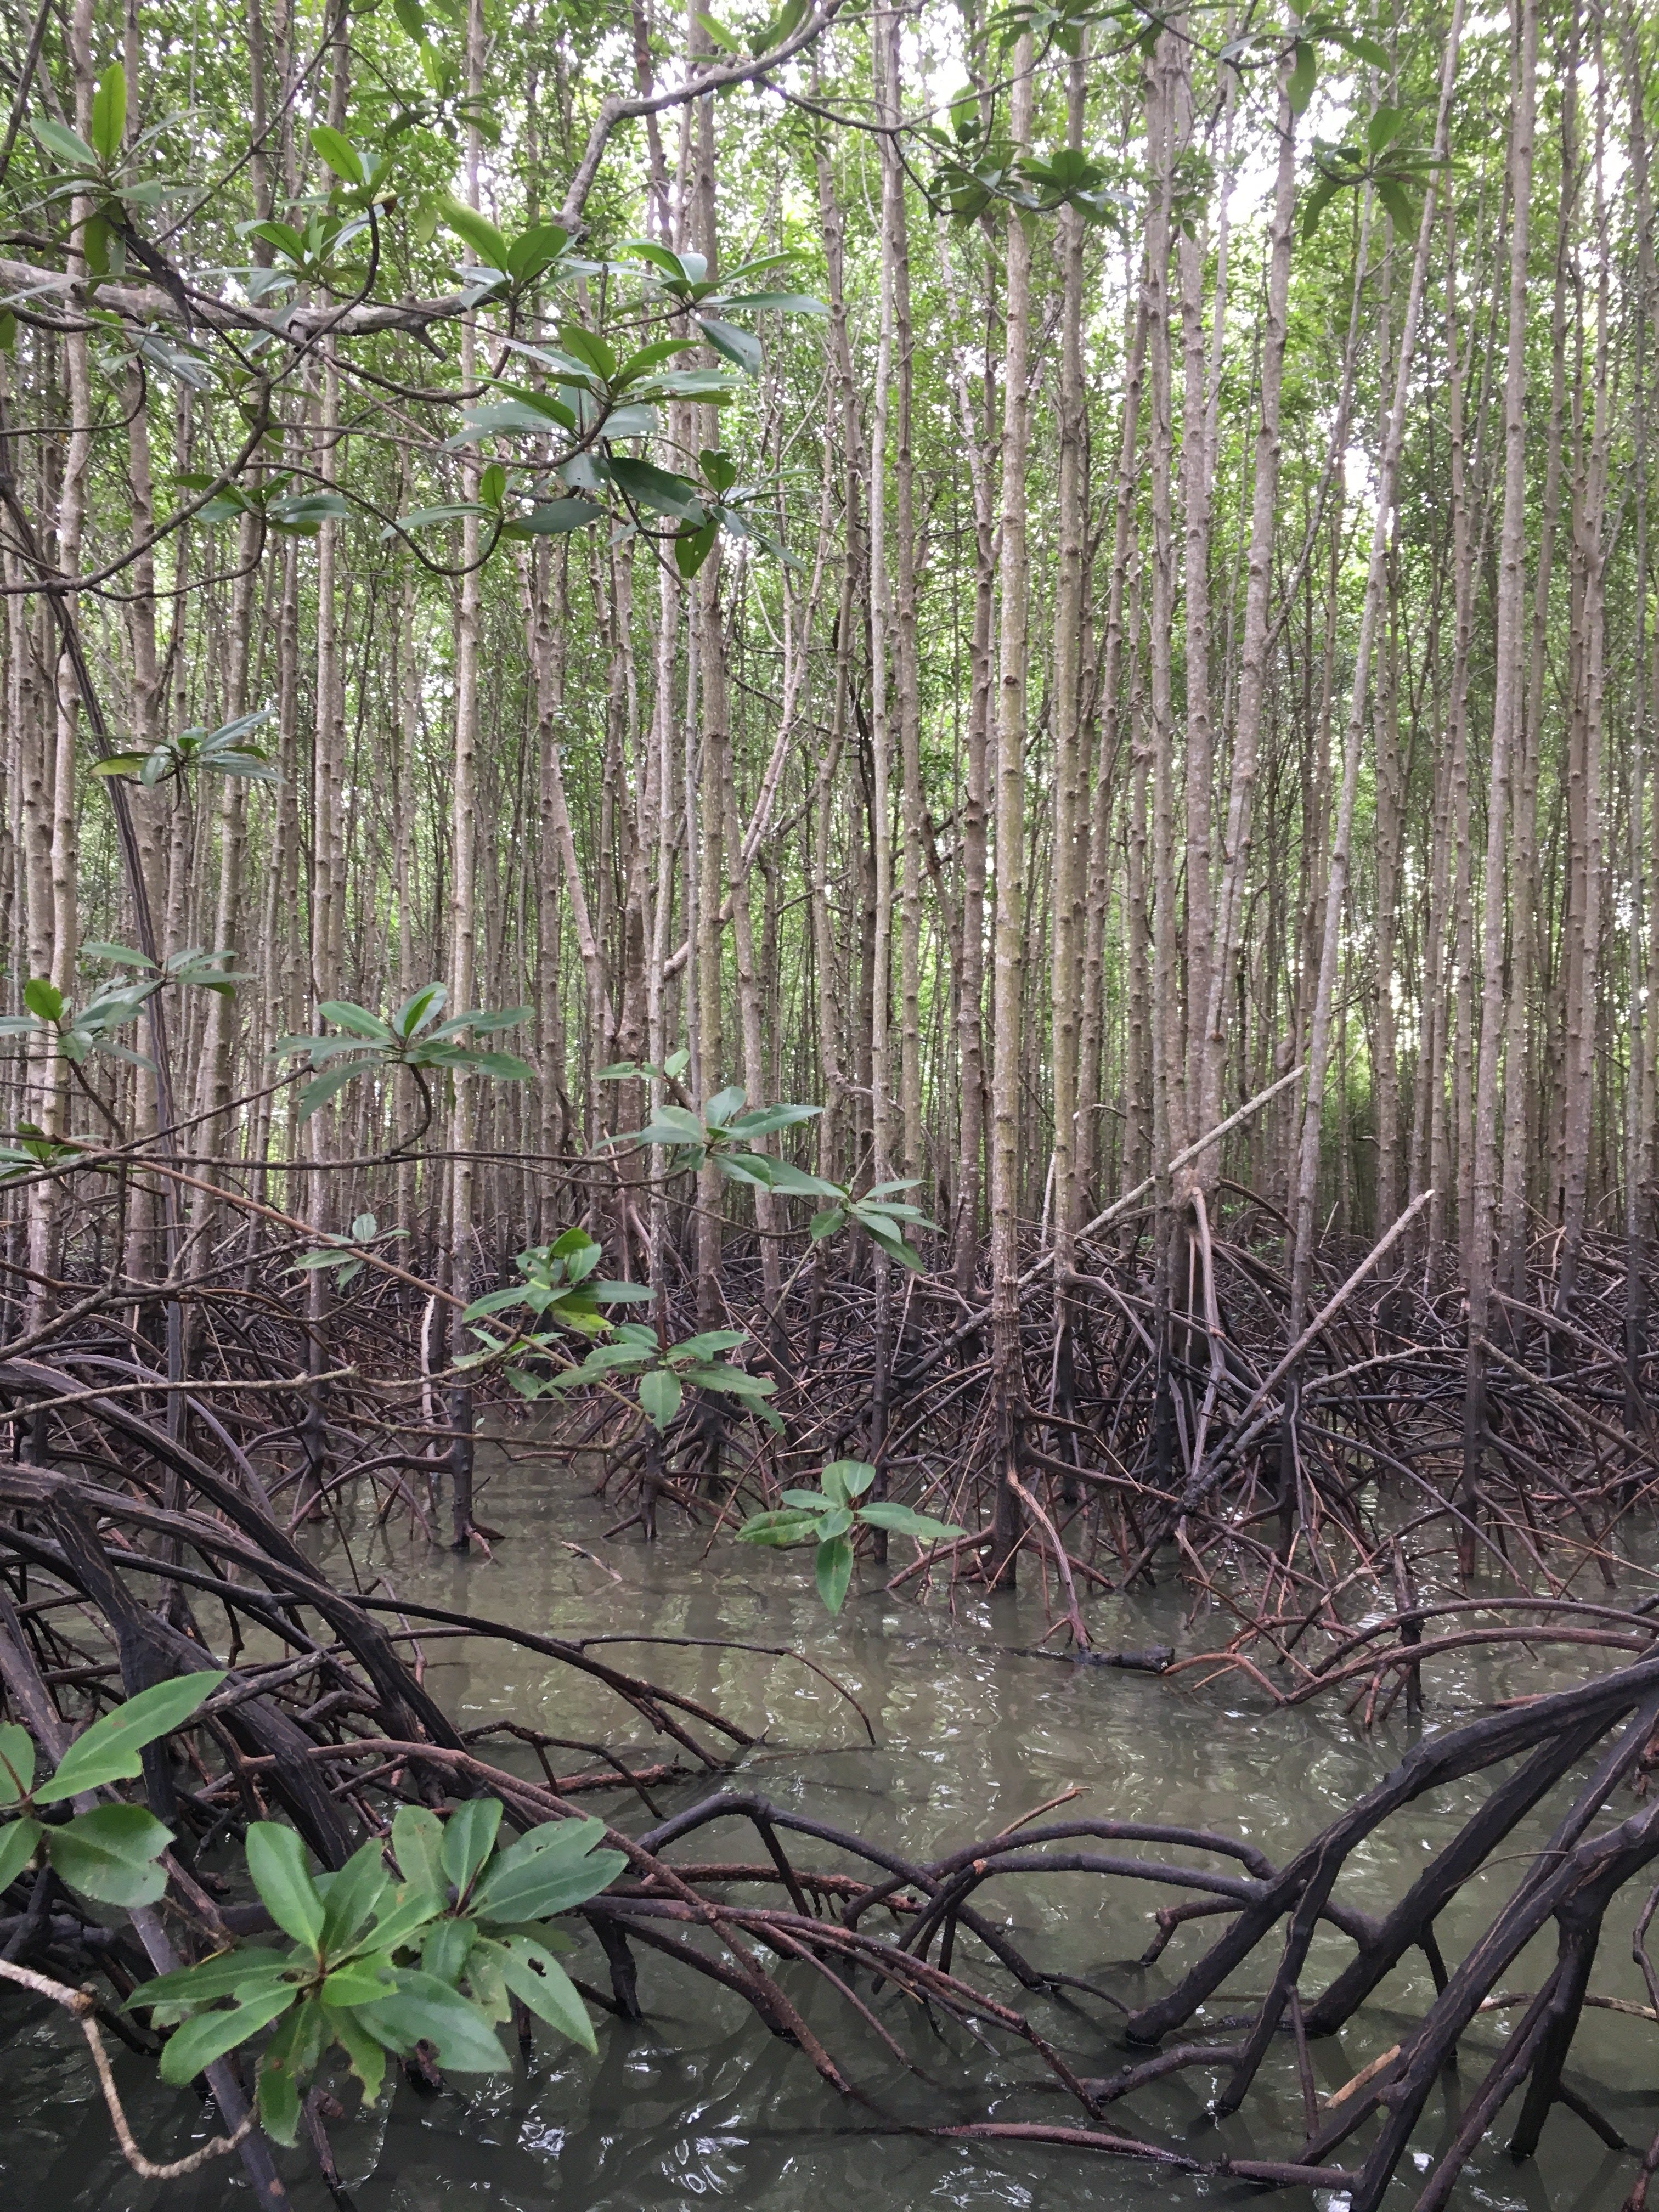 What are mangroves and why are they important?